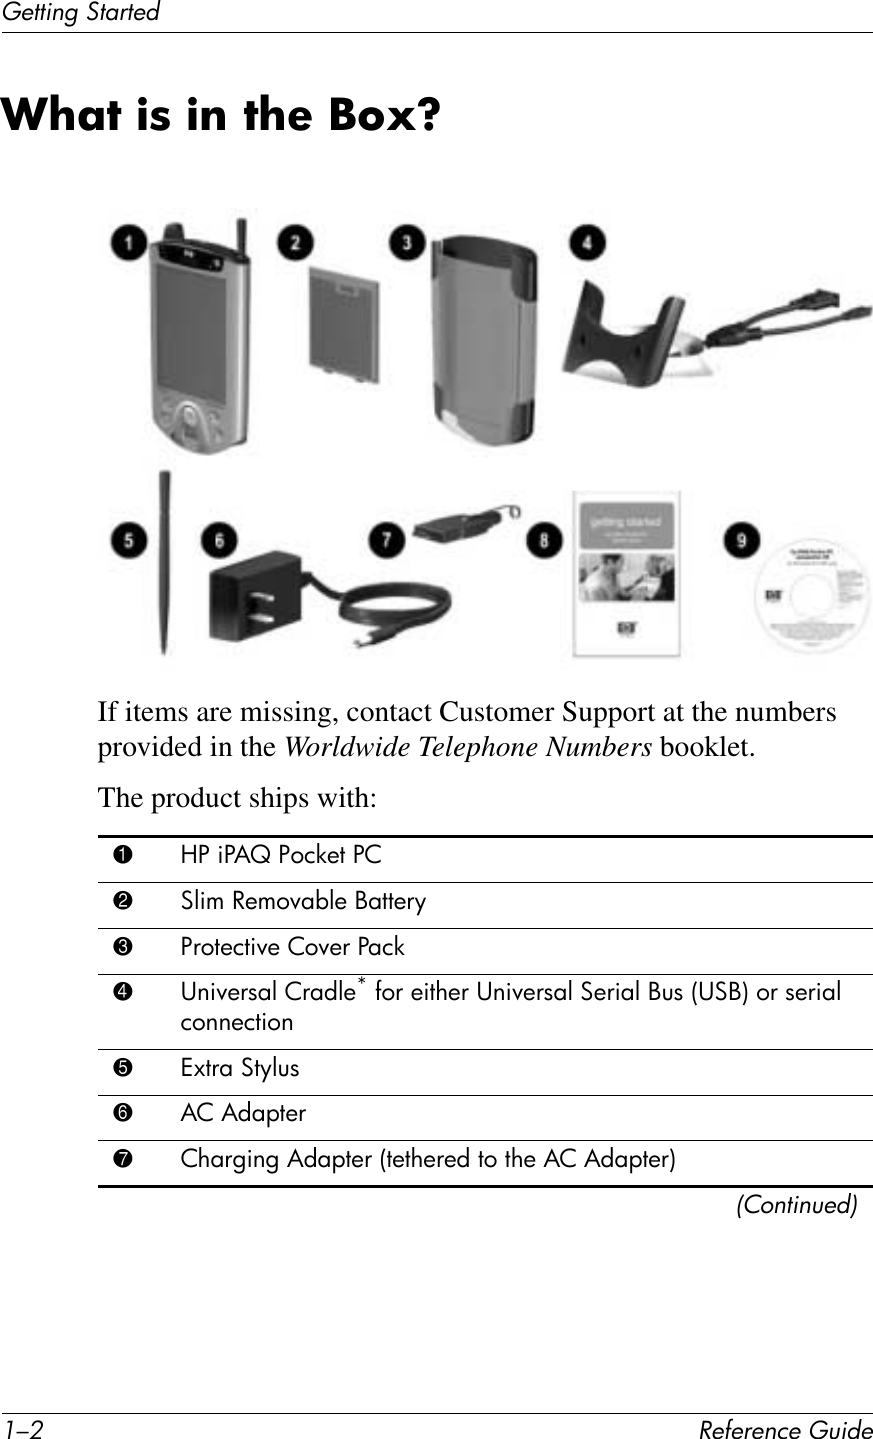 ./0 !&quot;#&quot;$&quot;%&amp;&quot;&apos;()*+&quot;(&quot;11*%2&apos;314$1&quot;++?;7&amp;)8&amp;)$&amp;7?&quot;&amp;C6QRIf items are missing, contact Customer Support at the numbers provided in the Worldwide Telephone Numbers booklet.The product ships with:1M%#$%&amp;&apos;#%()*+,#%-2ND$5#O+5(P79D+#Q7,,+2F3%2(,+),$P+#-(P+2#%7)*4R6$P+217D#-27CD+S#B(2#+$,!+2#R6$P+217D#N+2$7D#Q41#TRNQU#(2#1+2$7D#)(66+),$(65KA,27#N,FD416&amp;-#&amp;C7&quot;,+27-!72H$6H#&amp;C7&quot;,+2#T,+,!+2+C#,(#,!+#&amp;-#&amp;C7&quot;,+2U567%1*%)&quot;+8